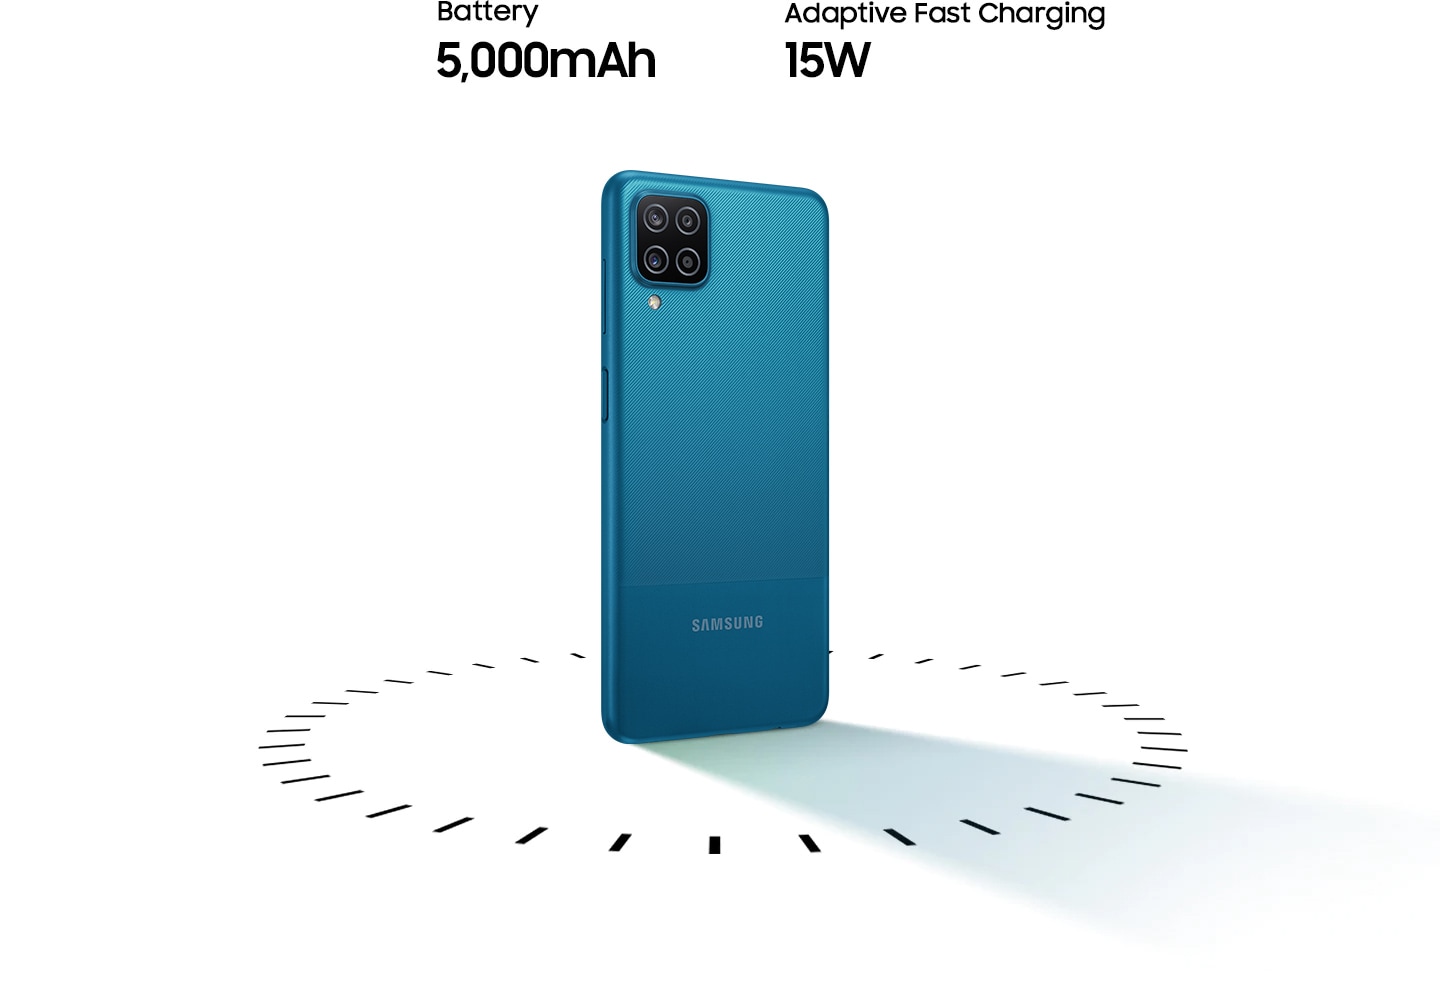 Galaxy A12 stands up, surrounded by circular dots, with the text of 5,000mAh Battery and 15W Adaptive Fast charging.